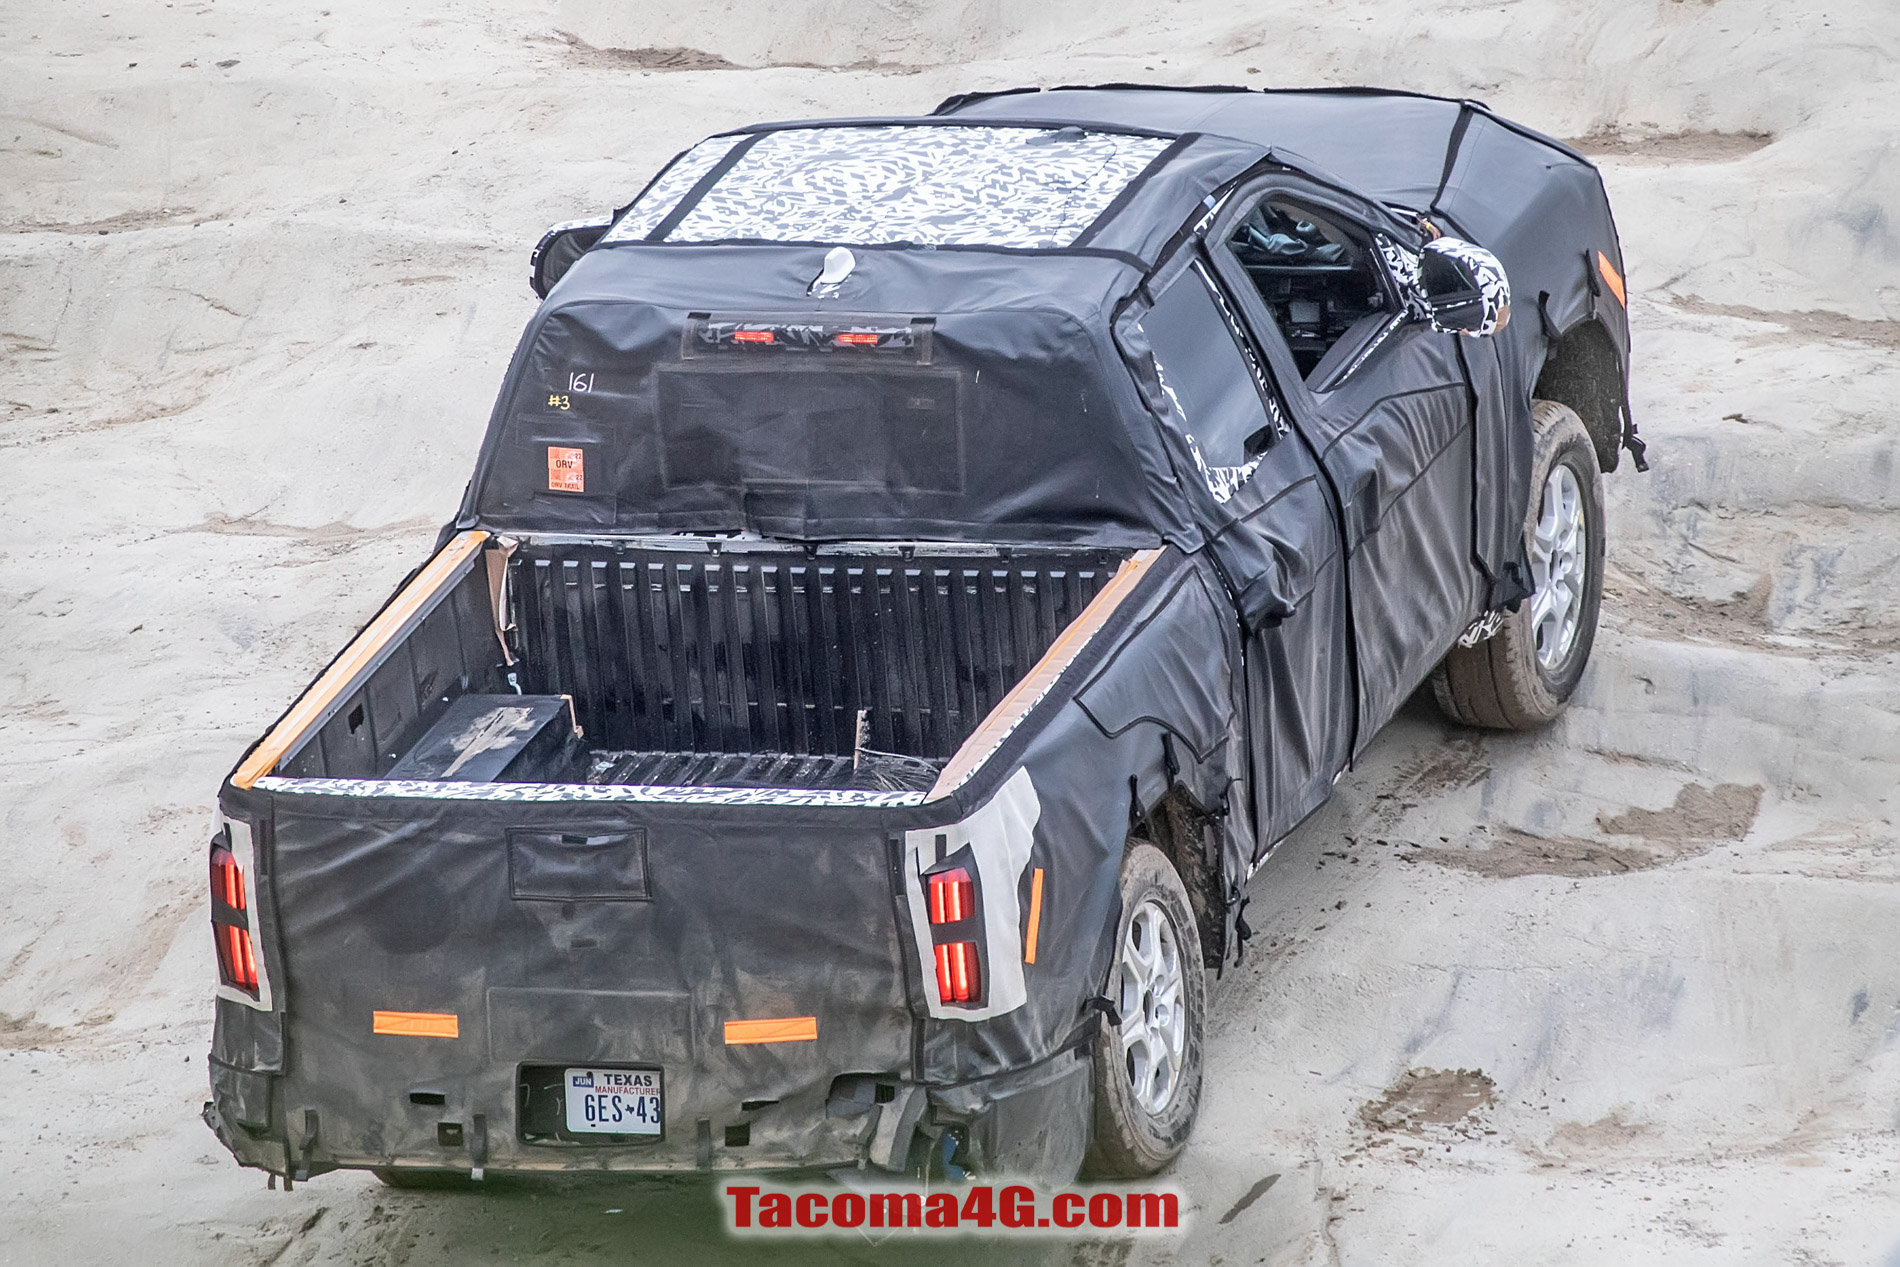 2024 Tacoma New 2024 Tacoma (4th Next Gen) Mule Off-Road Testing Reveals More Suspension Details -- 5/27/22 2024 Toyota Tacoma 4th gen spy photos suspension interior 15